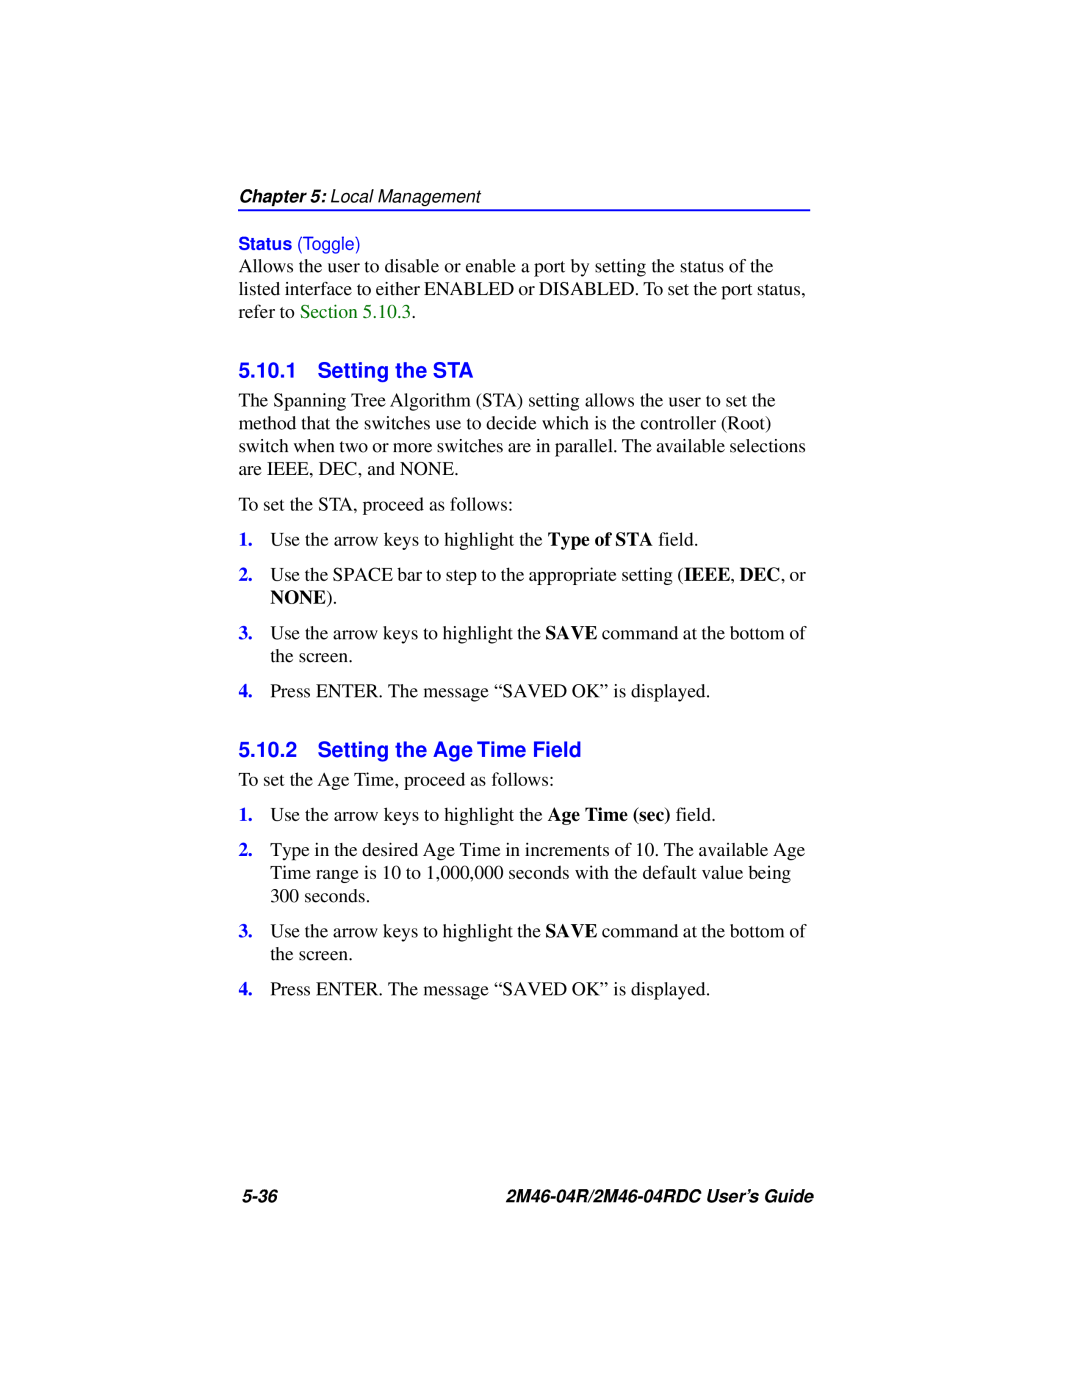 Cabletron Systems pmn manual Setting the STA, Setting the Age Time Field, Status Toggle 